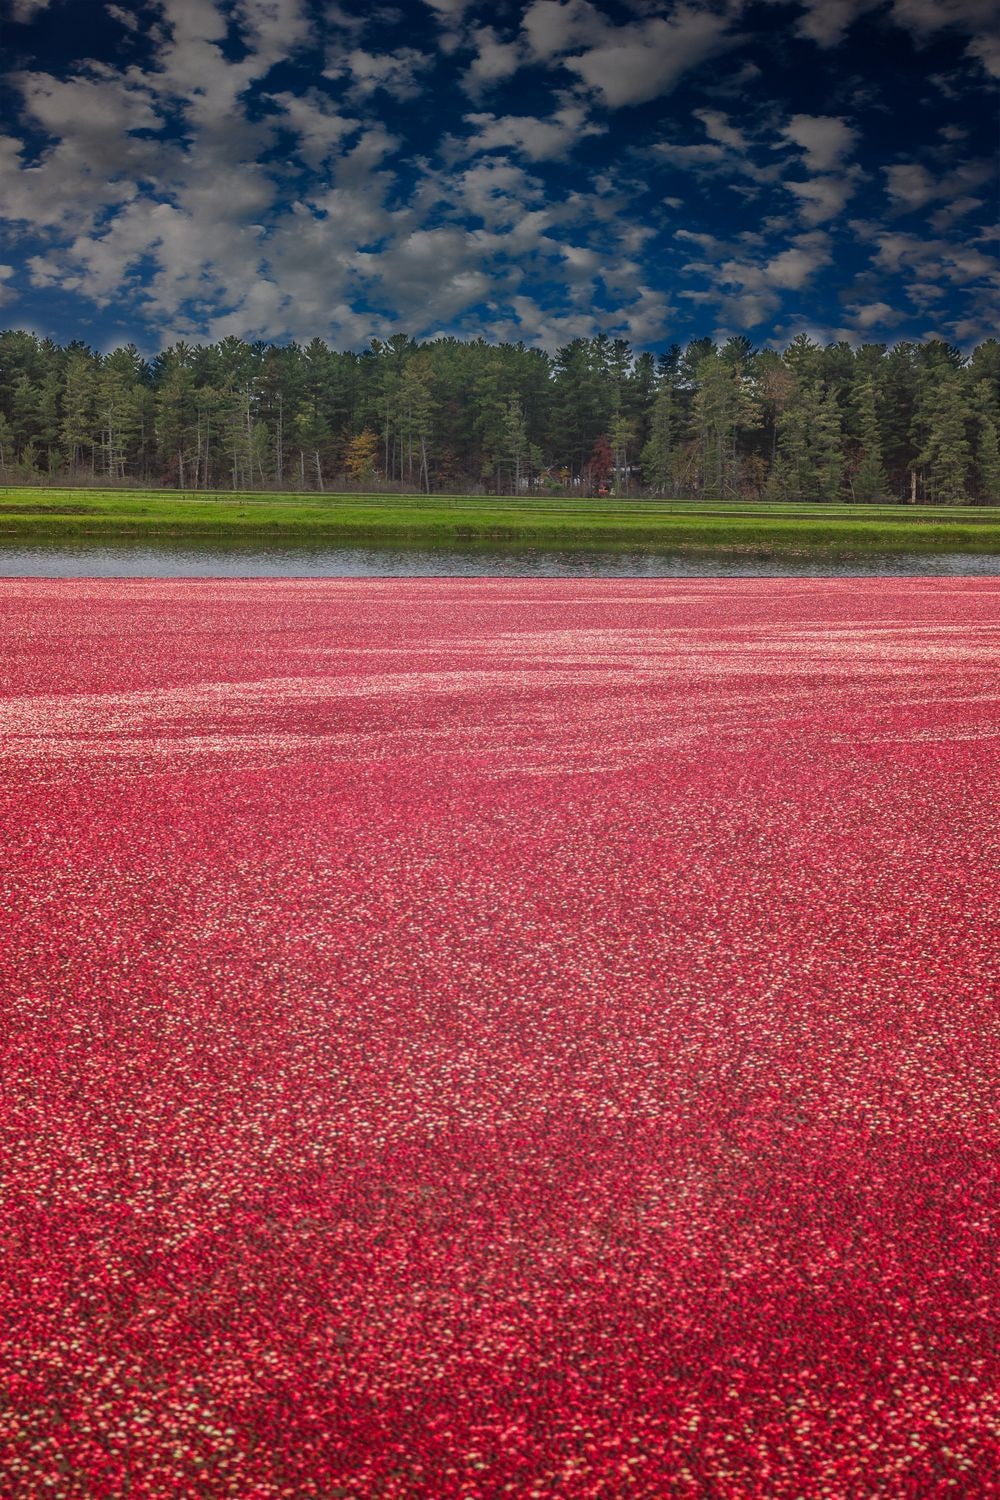 Cranberries floating in water near door County in Wisconsin ready for harvest.